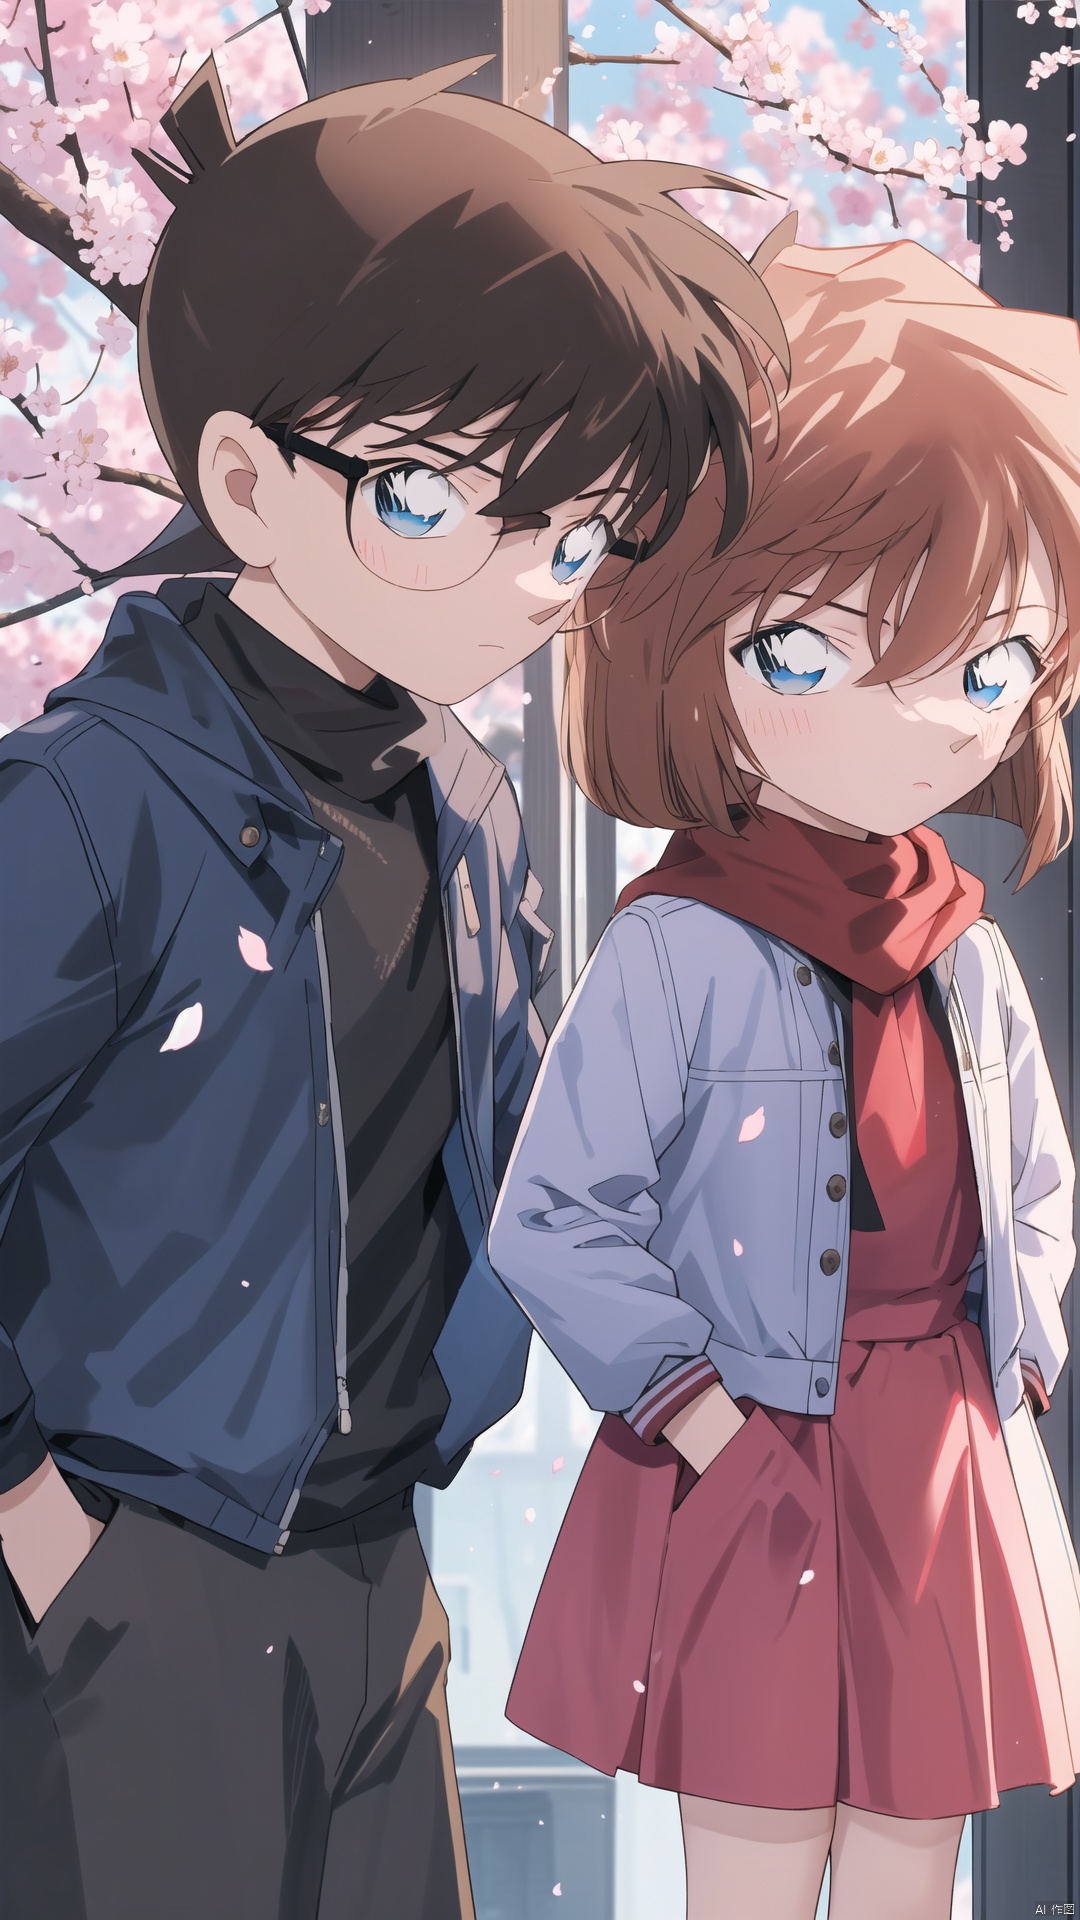  (((A man and a woman))), (((Short brown hair, blue eyes))), The image features a beautiful anime girl dressed in a flowing white and red dress, standing amidst a flurry of red cherry blossoms. The contrast between her white dress and the red flowers creates a striking visual effect. The lighting in the image is well-balanced, casting a warm glow on the girl and the surrounding flowers. The colors are vibrant and vivid, with the red cherry blossoms standing out against the white sky. The overall style of the image is dreamy and romantic, perfect for a piece of anime artwork. The quality of the image is excellent, with clear details and sharp focus. The girl's dress and the flowers are well-defined, and the background is evenly lit, without any harsh shadows or glare. From a technical standpoint, the image is well-composed, with the girl standing in the center of the frame, surrounded by the blossoms. The use of negative space in the background helps to draw the viewer's attention to the girl and the flowers. The cherry blossoms, often associated with transience and beauty, further reinforce this theme. The girl, lost in her thoughts, seems to be contemplating the fleeting nature of beauty and the passage of time. Overall, this is an impressive image that showcases the photographer's skill in capturing the essence of a scene, as well as their ability to create a compelling narrative through their art.catgirl,loli, kanade, (\shen ming shao nv\), cozy anime, 1girl, solo, looking at viewer, hair, blurry, blurry background, blush, bangs, depth of field,cuteloli,solo,long hair,blueeyes,shirt,hairbetweeneyes,verylonghair,bluehair,standing,jacket,,shorts,school_girl,schooluniform,bluejacket,trackjacket,,kanade,HaibaraAi,哀, haibara ai, 1boy